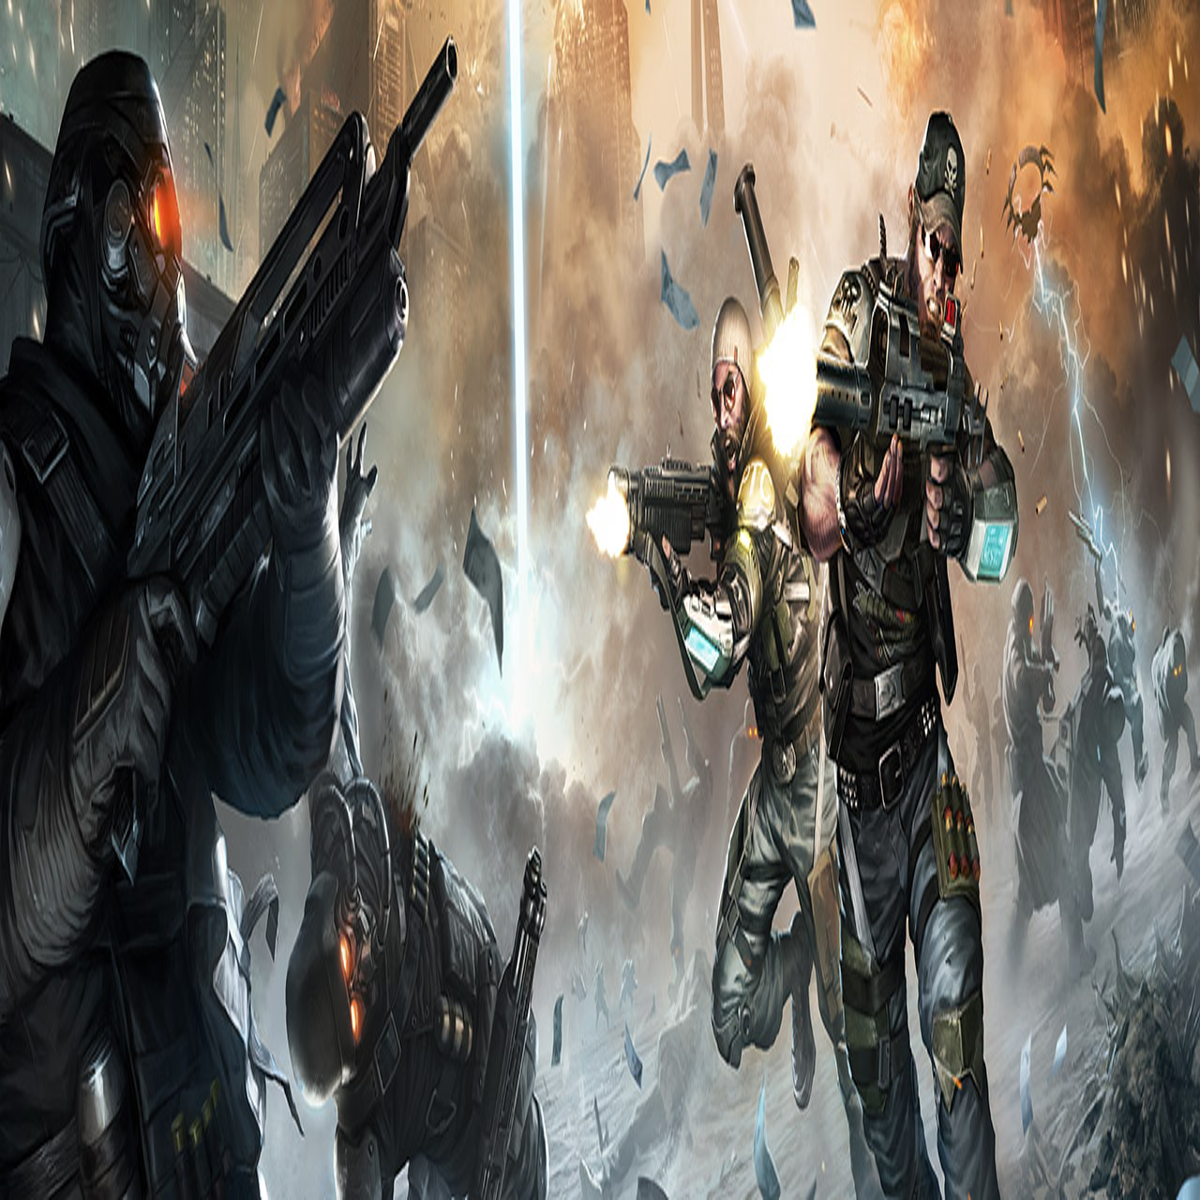 Killzone Shadow Fall adds in-game currency alternative to microtransactions